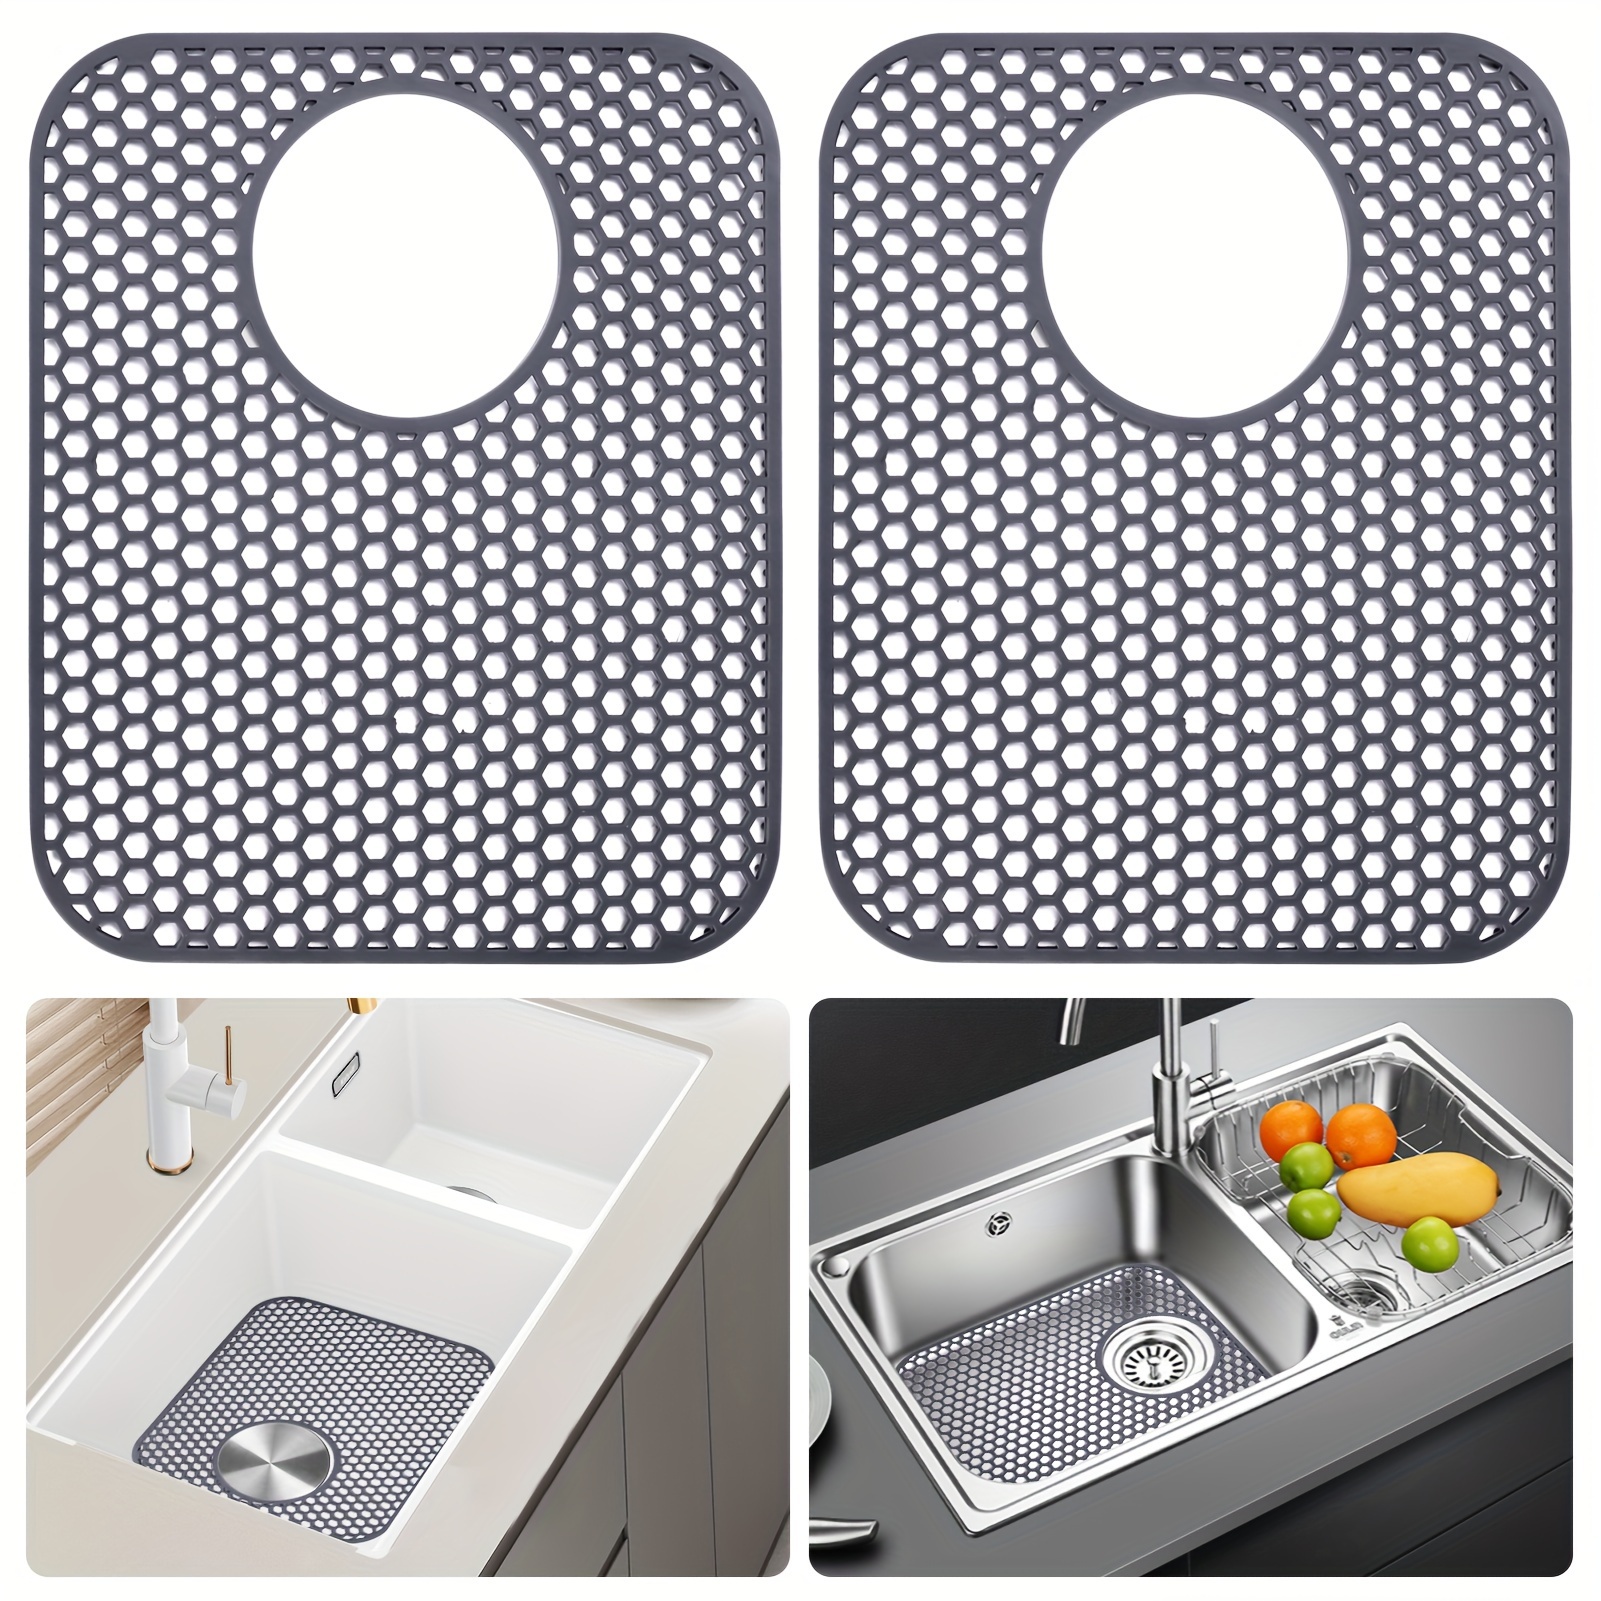 Sink Protectors for Kitchen Sink 13.58X 11.6 Sink Mat,2PCS Silicone Kitch  TOP